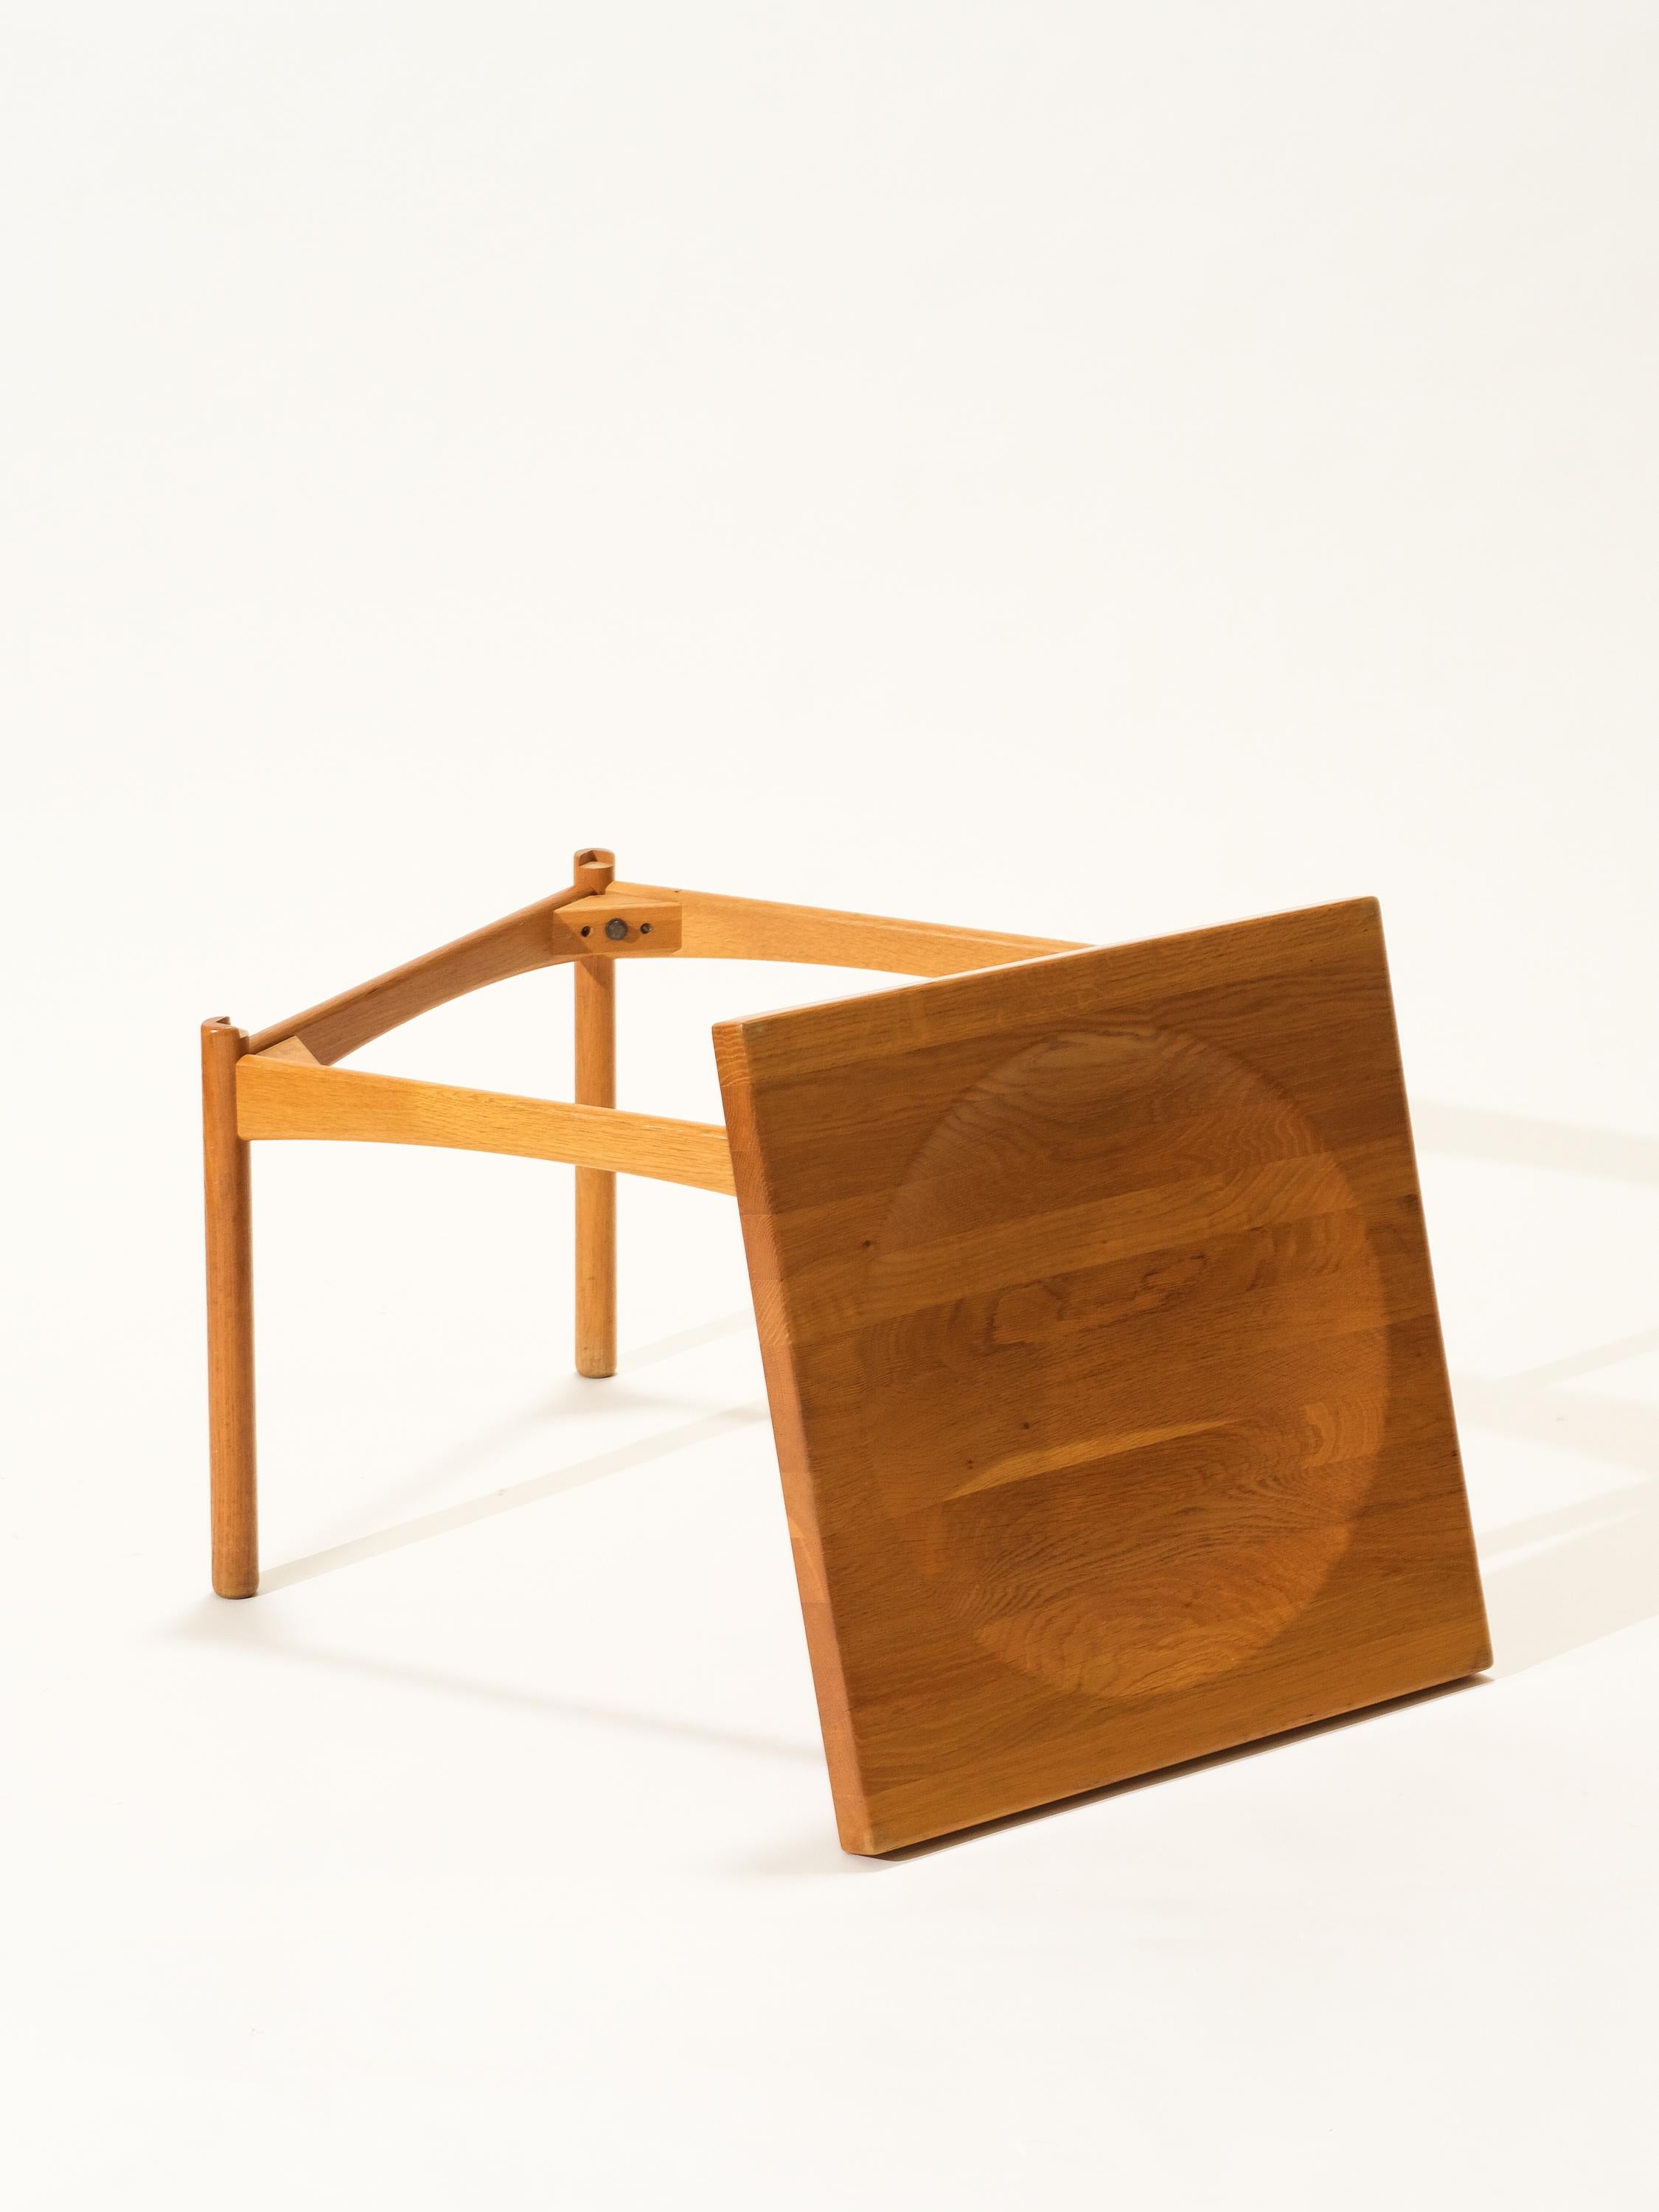 Solid Oak Coffee/Tray Table by Gunnar Myrstrand for Källemo, Sweden, 1960s For Sale 5